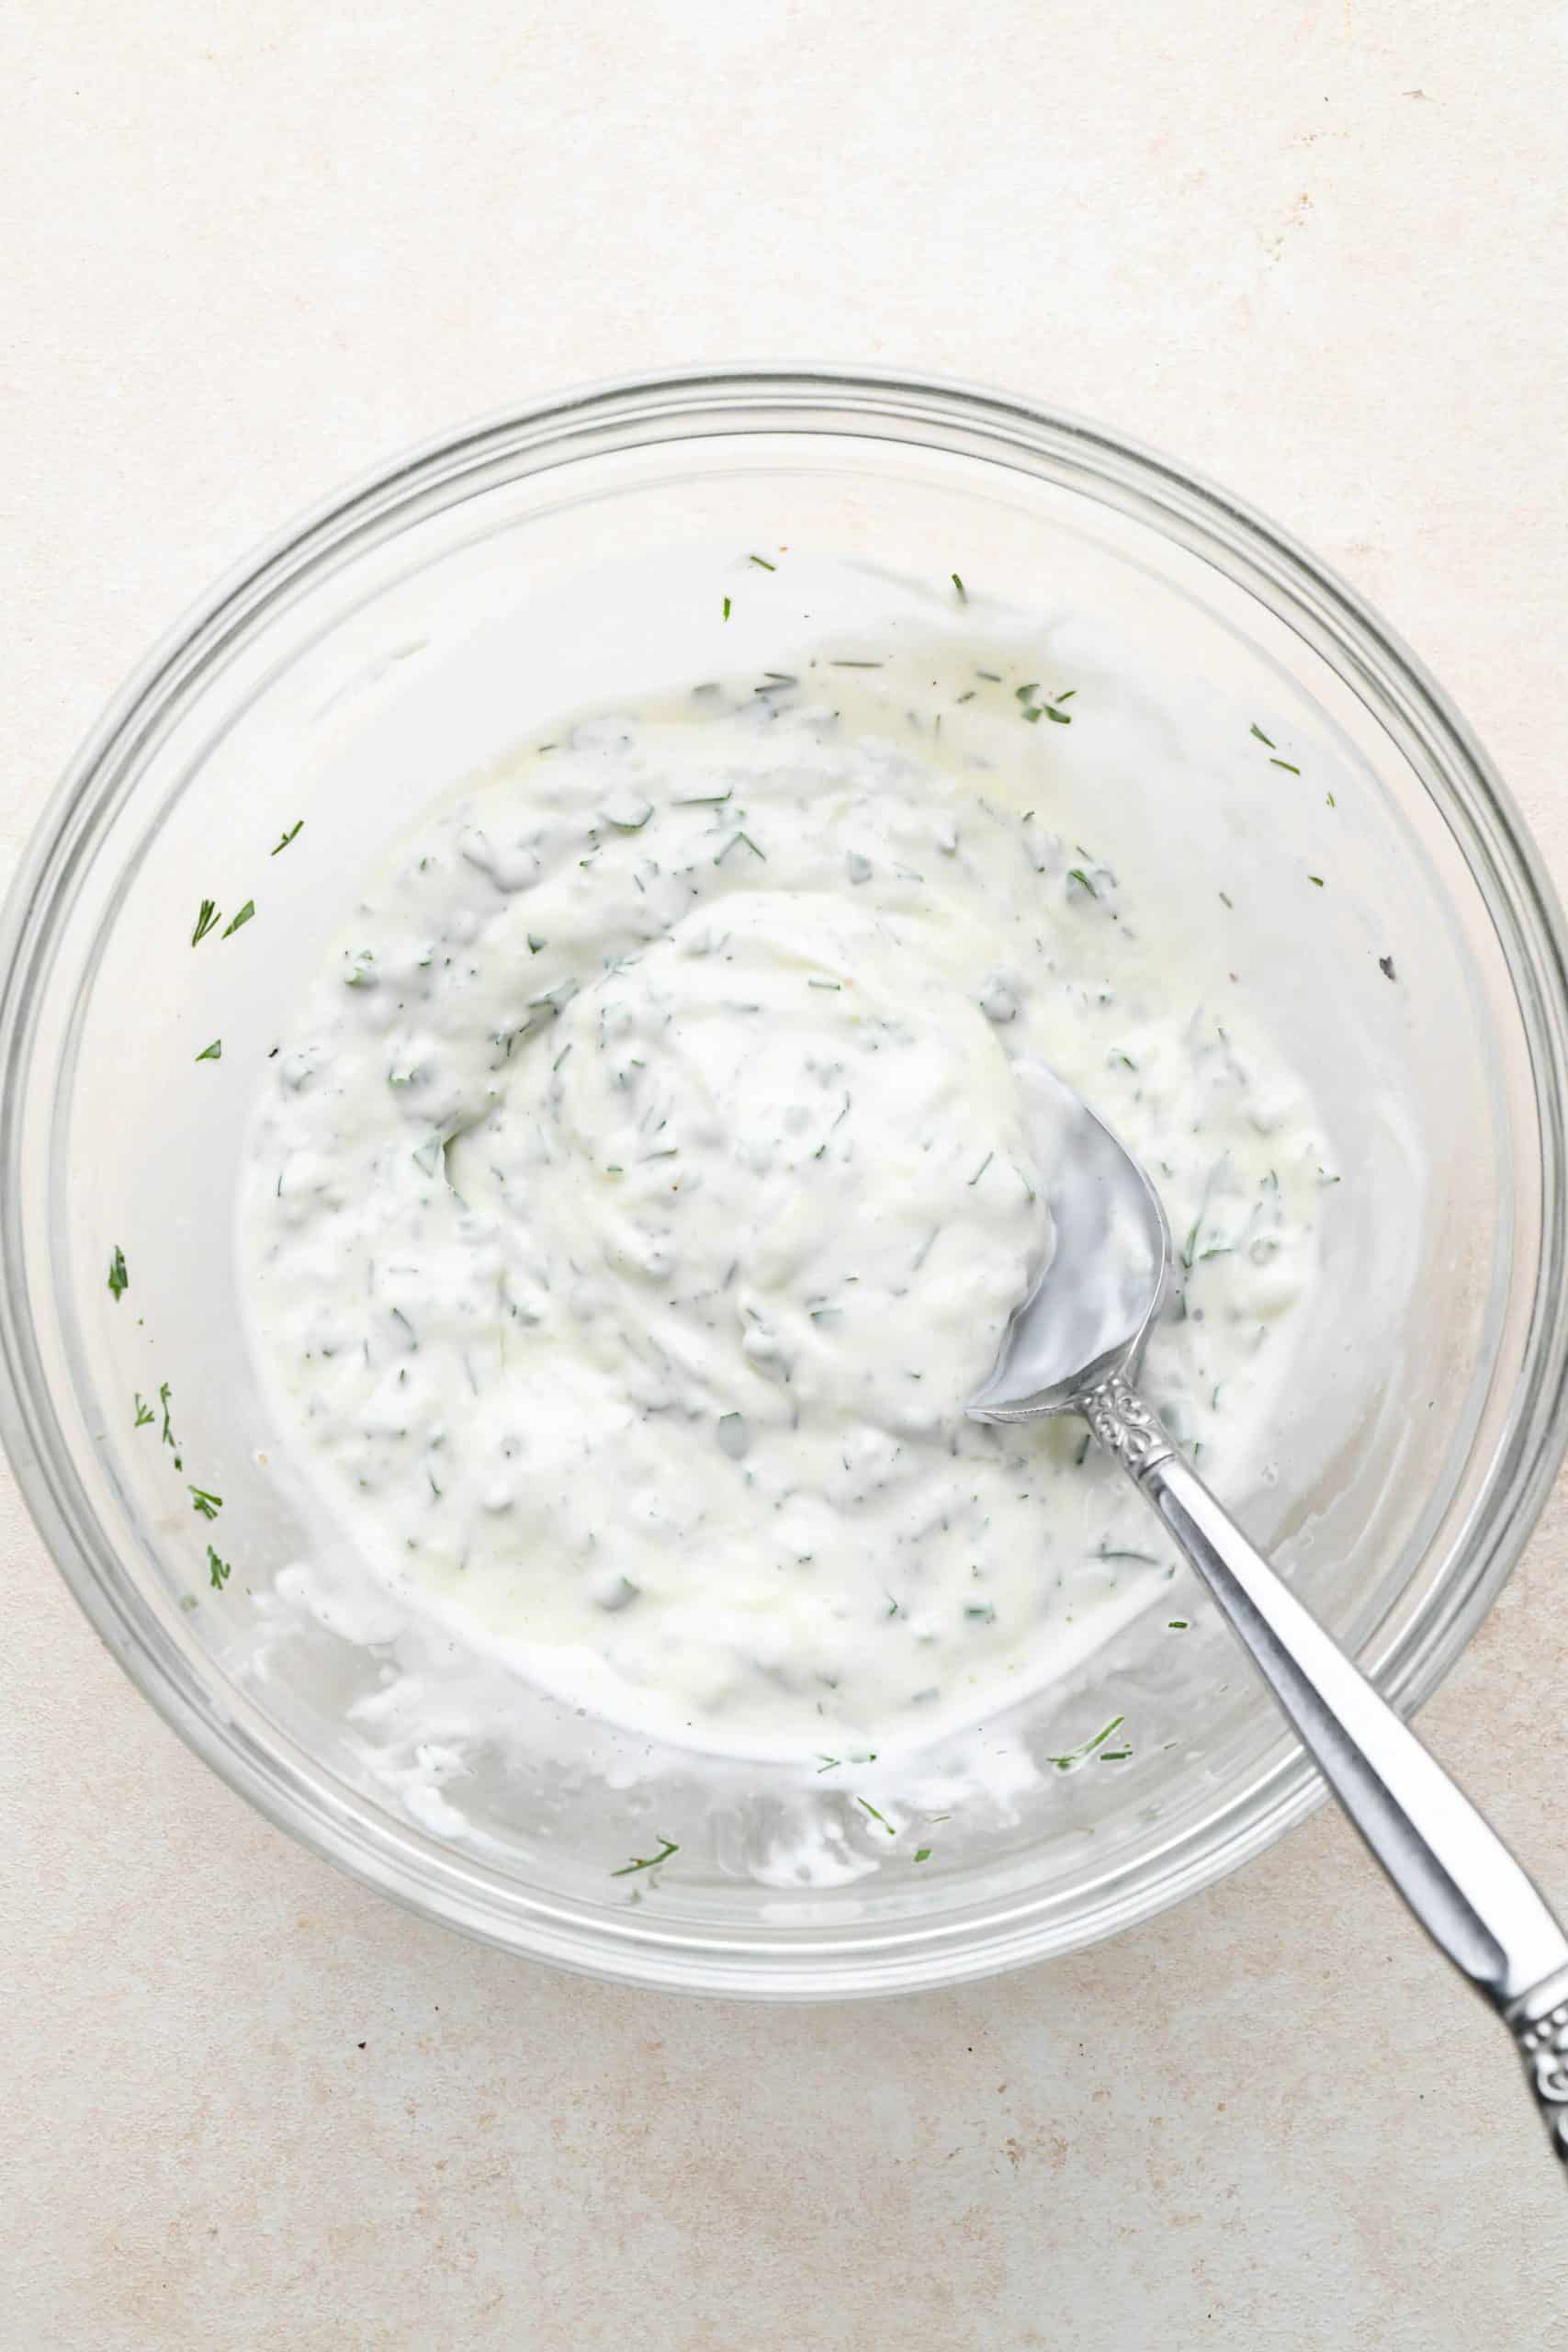 How to make Garlic Herb Aioli: Ingredients for aioli mixed together in a small glass bowl.